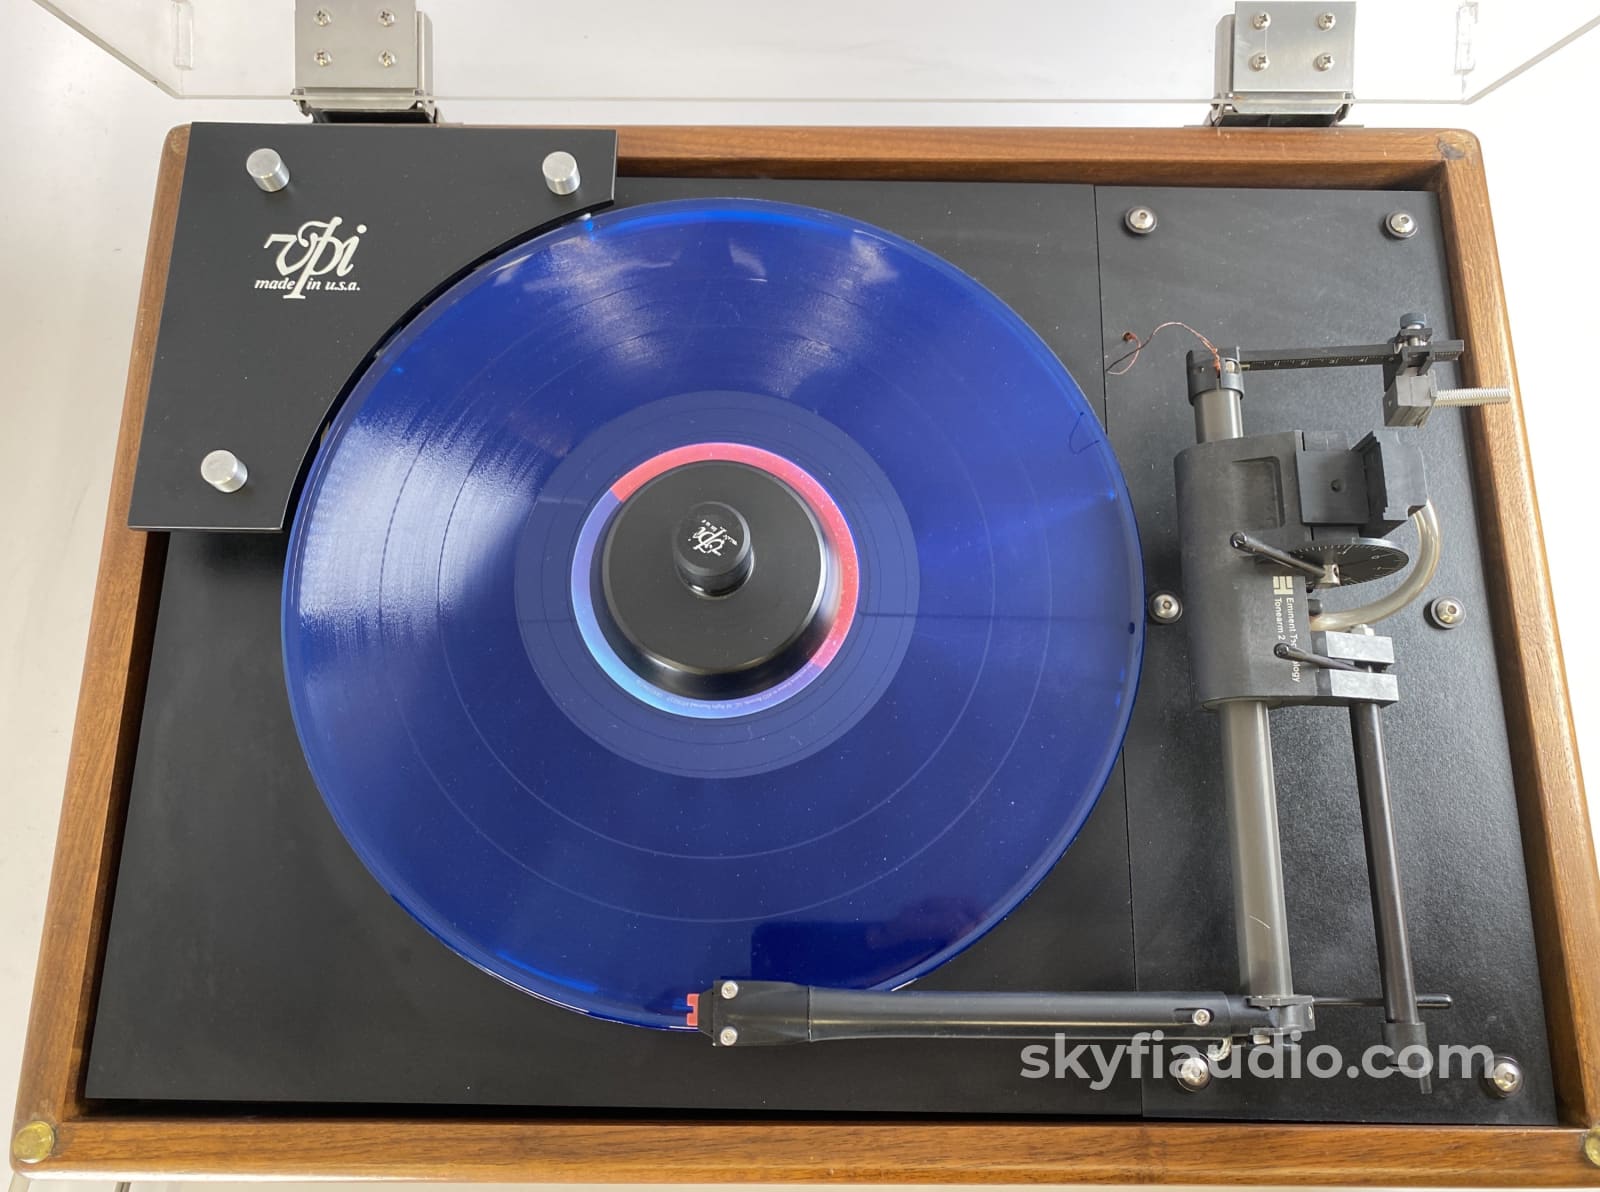 VPI HW-19 Turntable with Tangential Tonearm and Pump - In Dark Mahogan